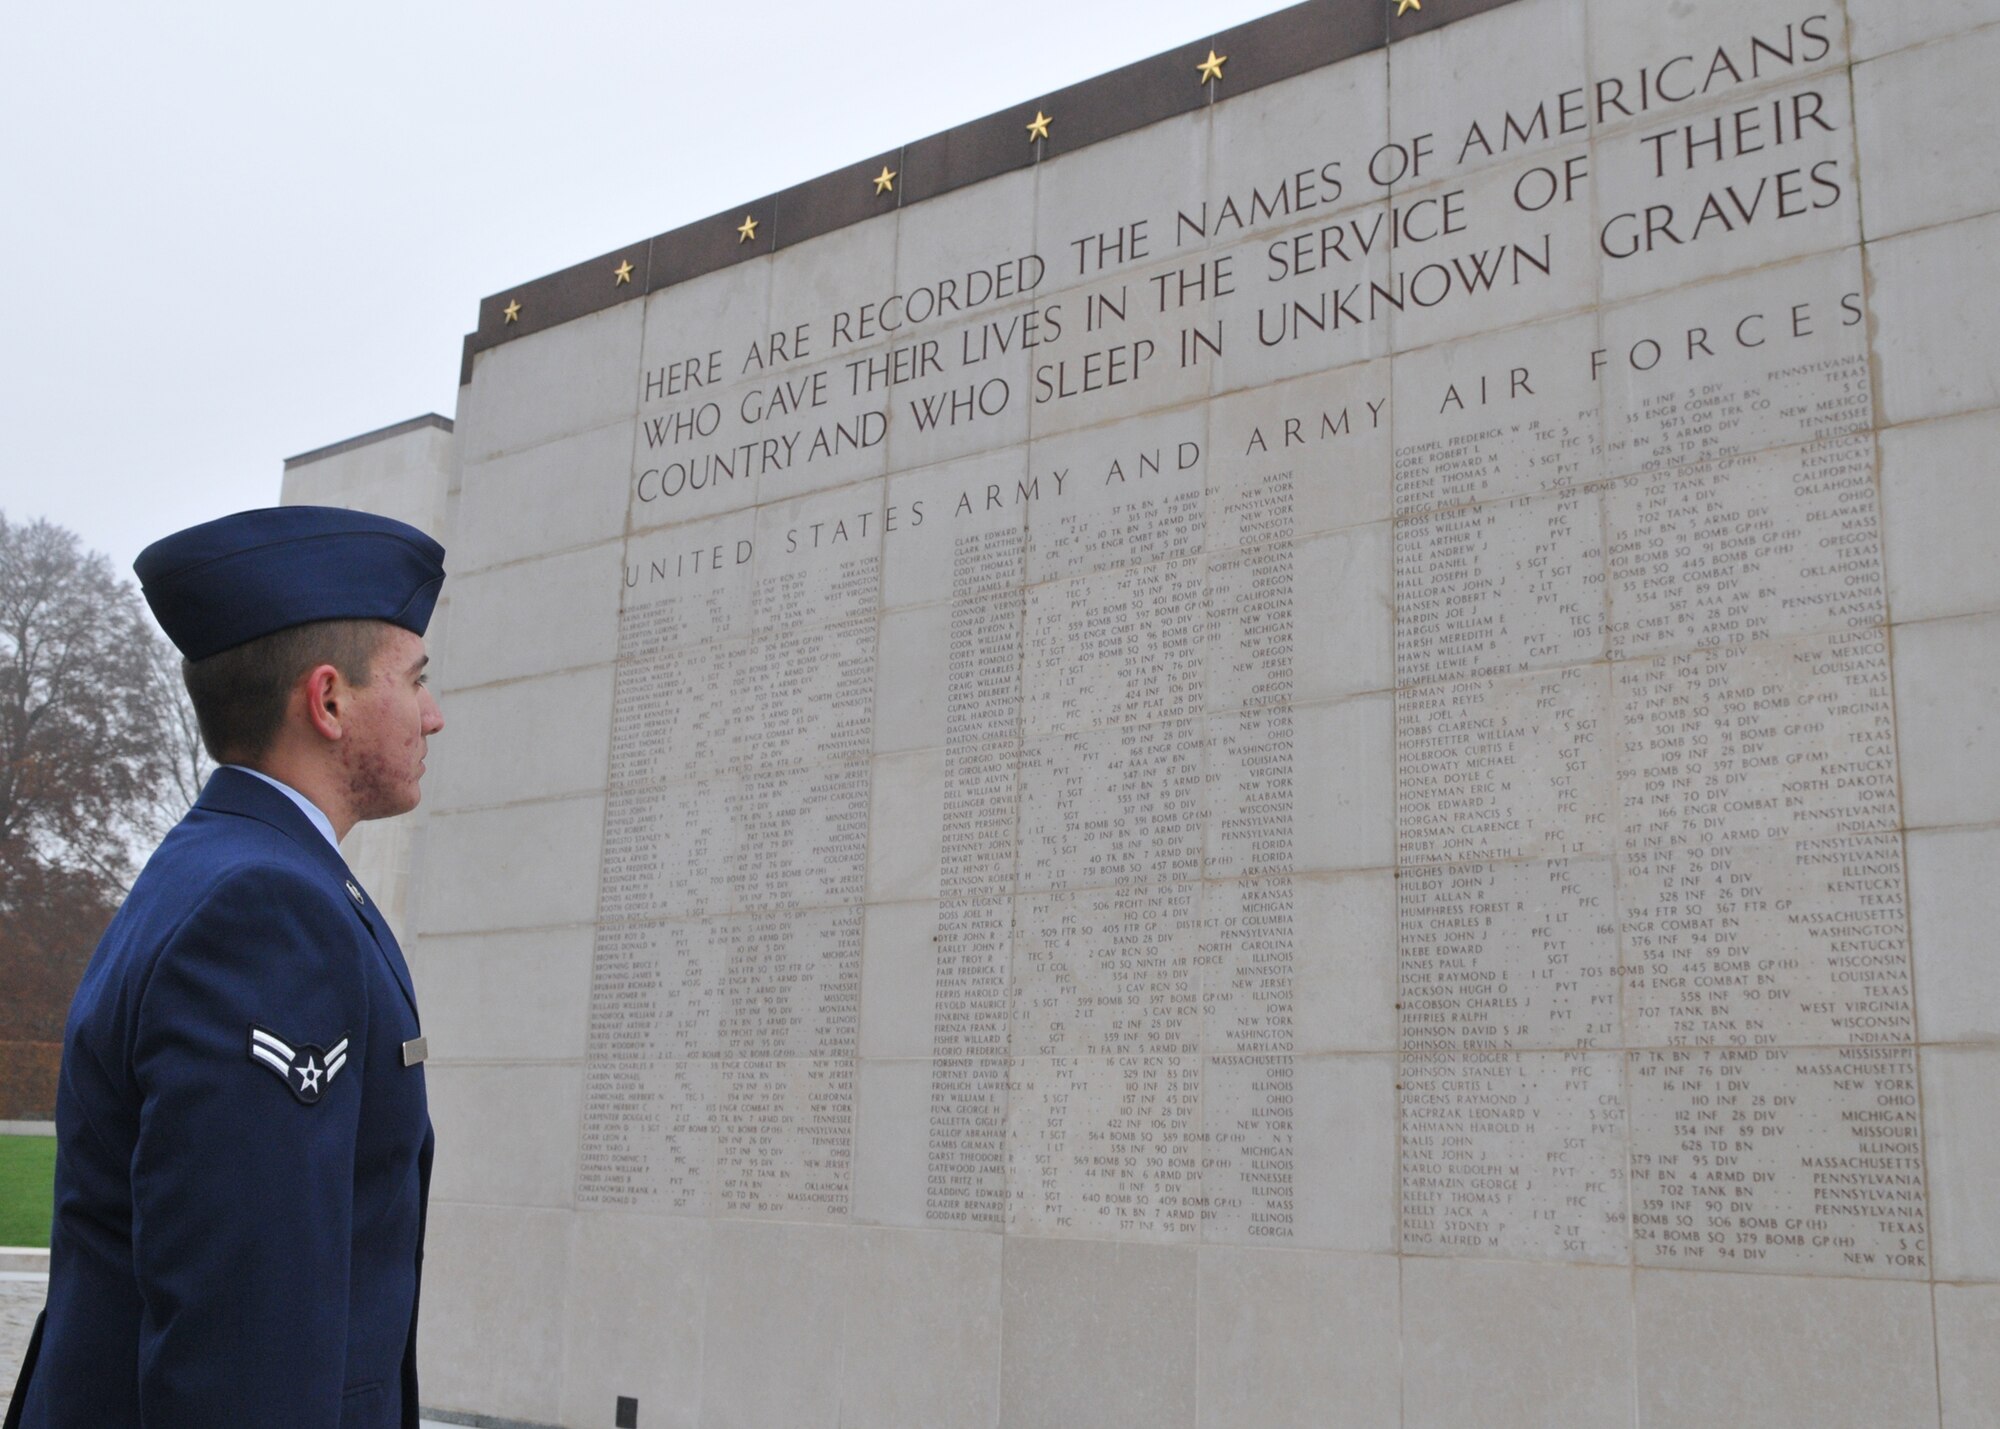 SPANGDAHLEM AIR BASE, Germany -- Airman 1st Class Michael D. Kimball, 52nd Operations Support Squadron, looks at the names of Americans who died in service of their country at the Luxembourg American Cemetery and Memorial in Luxembourg City Nov. 11. More than 5,000 American servicemembers fighting in World War II now rest at the 50.5 acre cemetery, which is one of 14 American cemeteries established overseas after World War II. (U.S. Air Force photo/Airman 1st Class Nick Wilson)